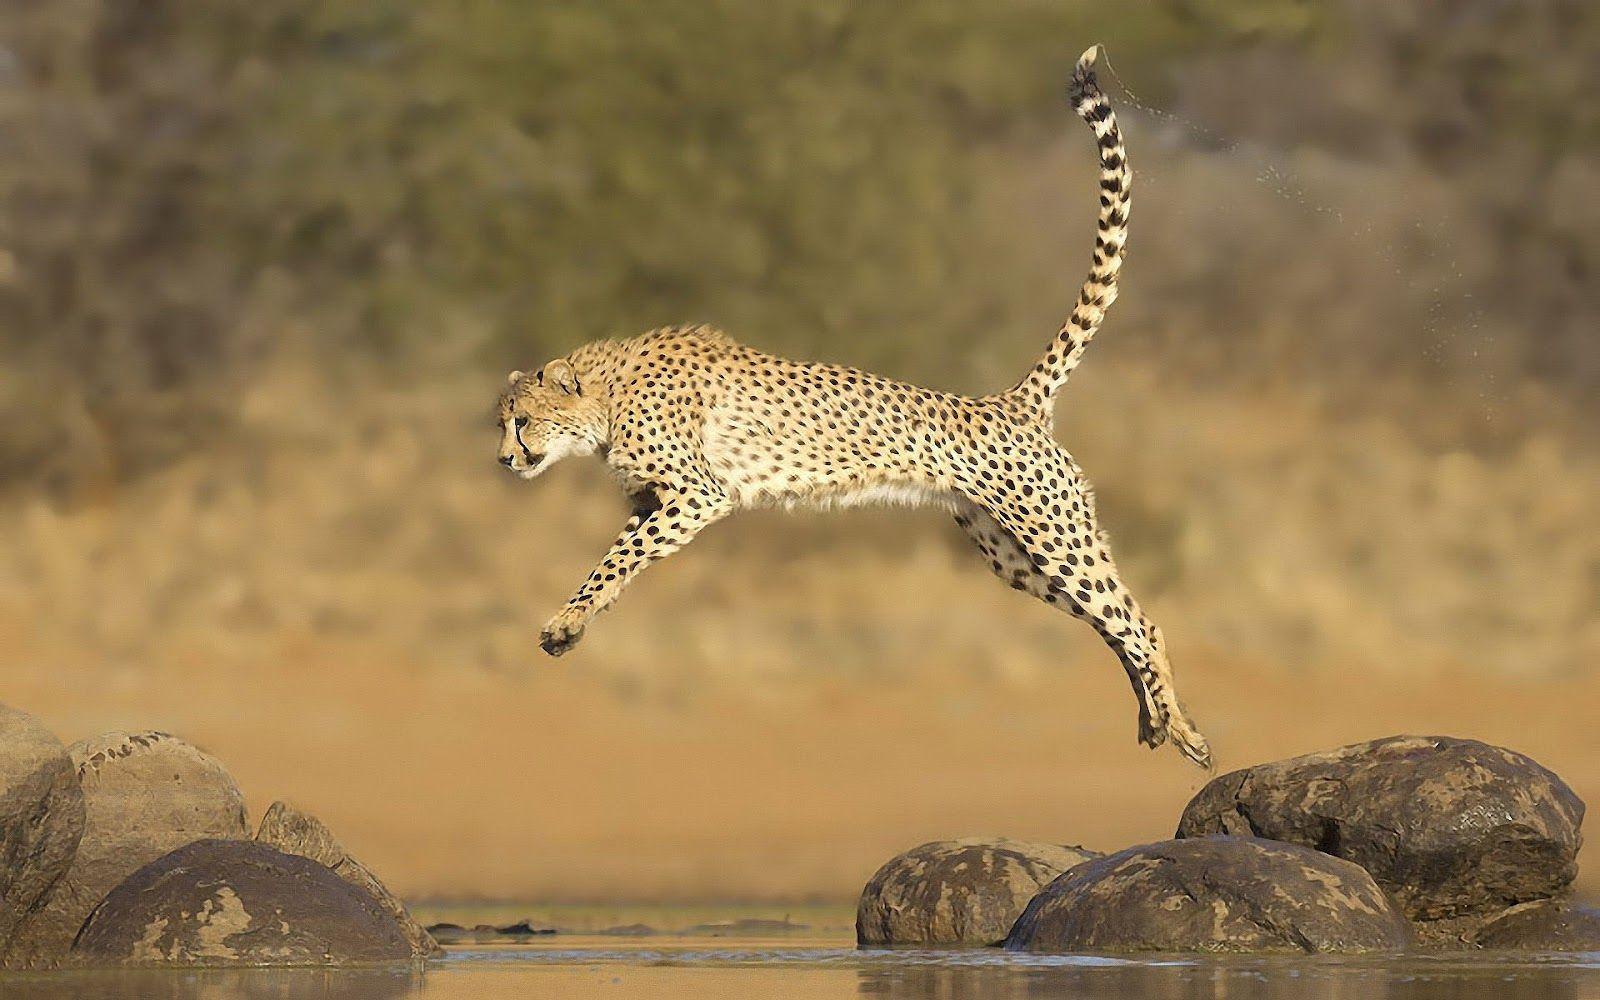 Picture of jumping cheetah over water